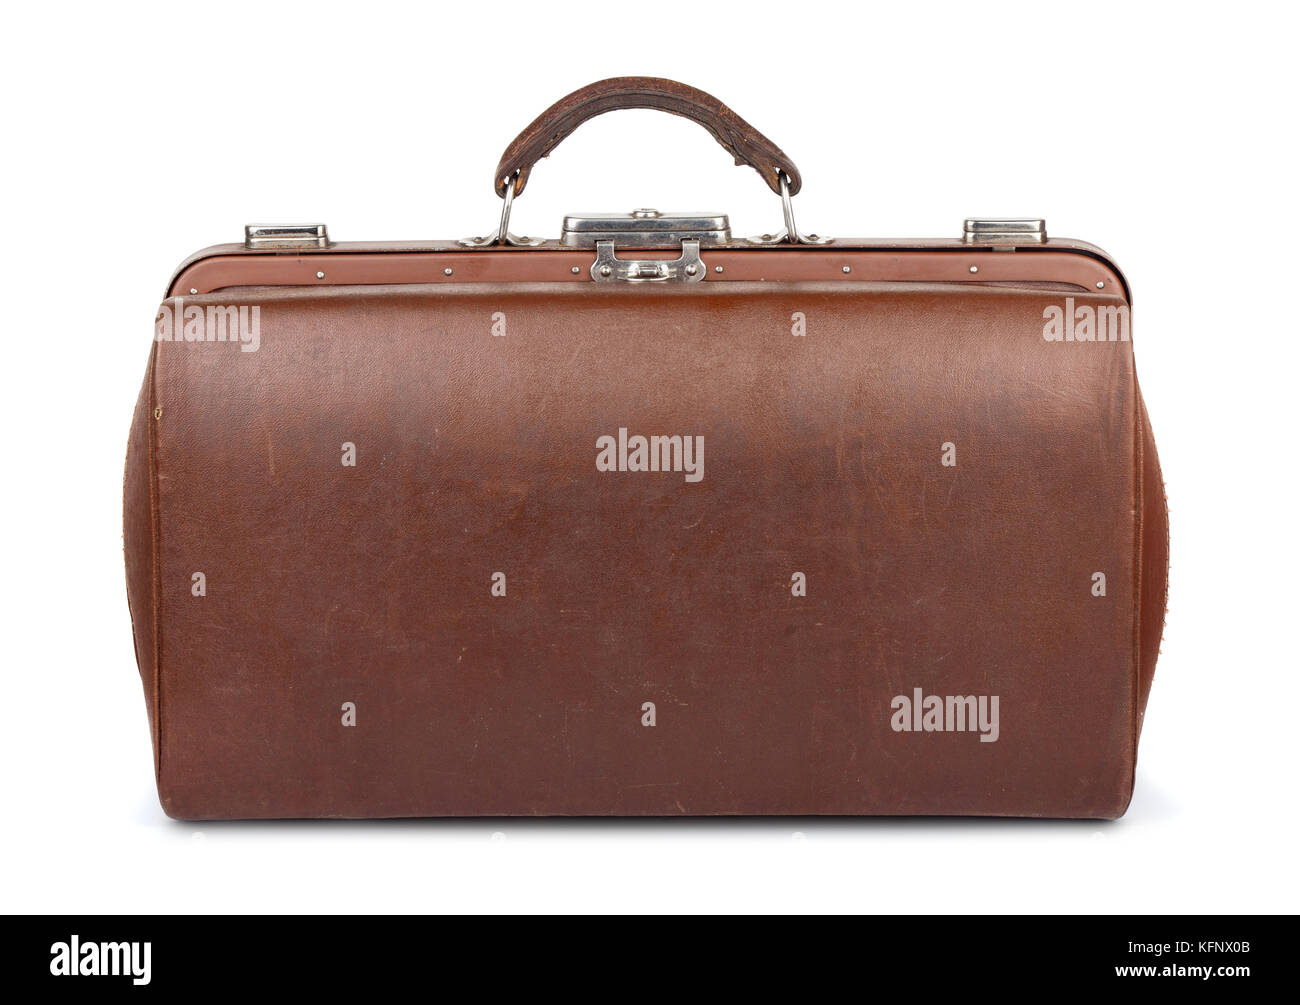 Why Is The Gladstone Travel Bag A British Icon